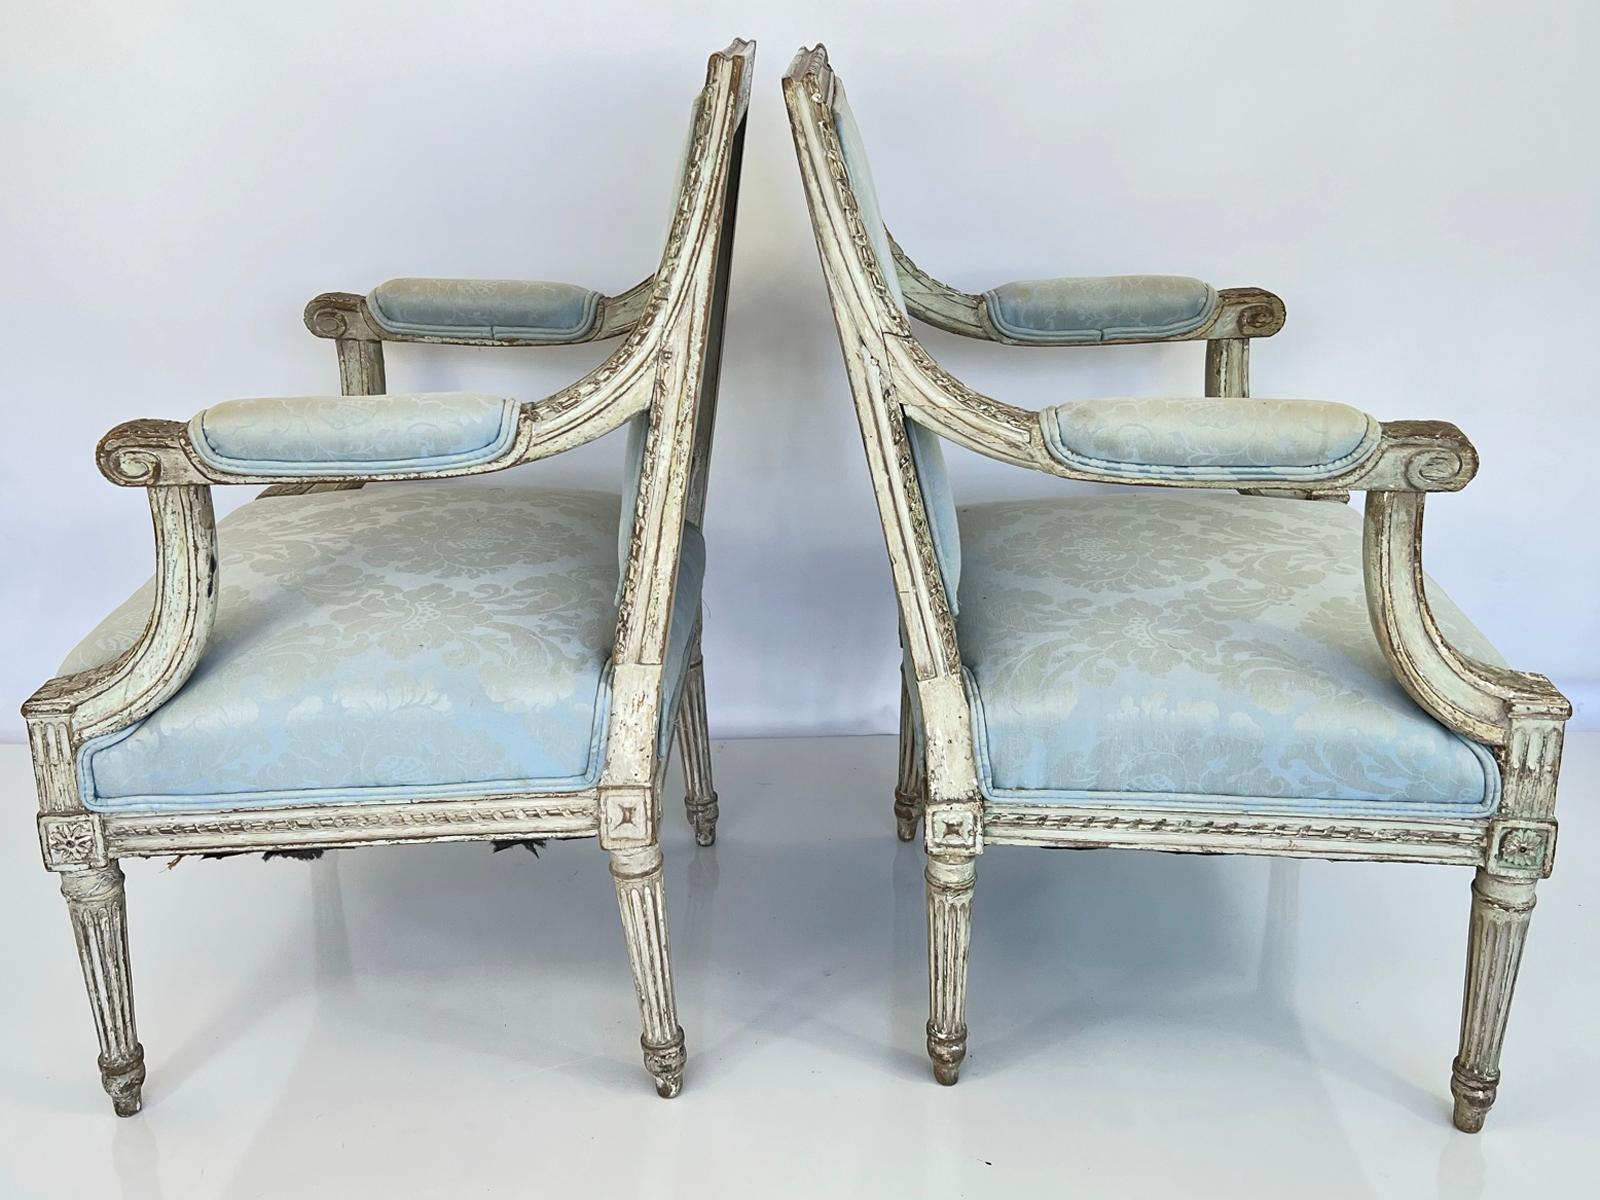 Pair of 18th/19th Century French Carved Fauteuils In Good Condition For Sale In West Palm Beach, FL